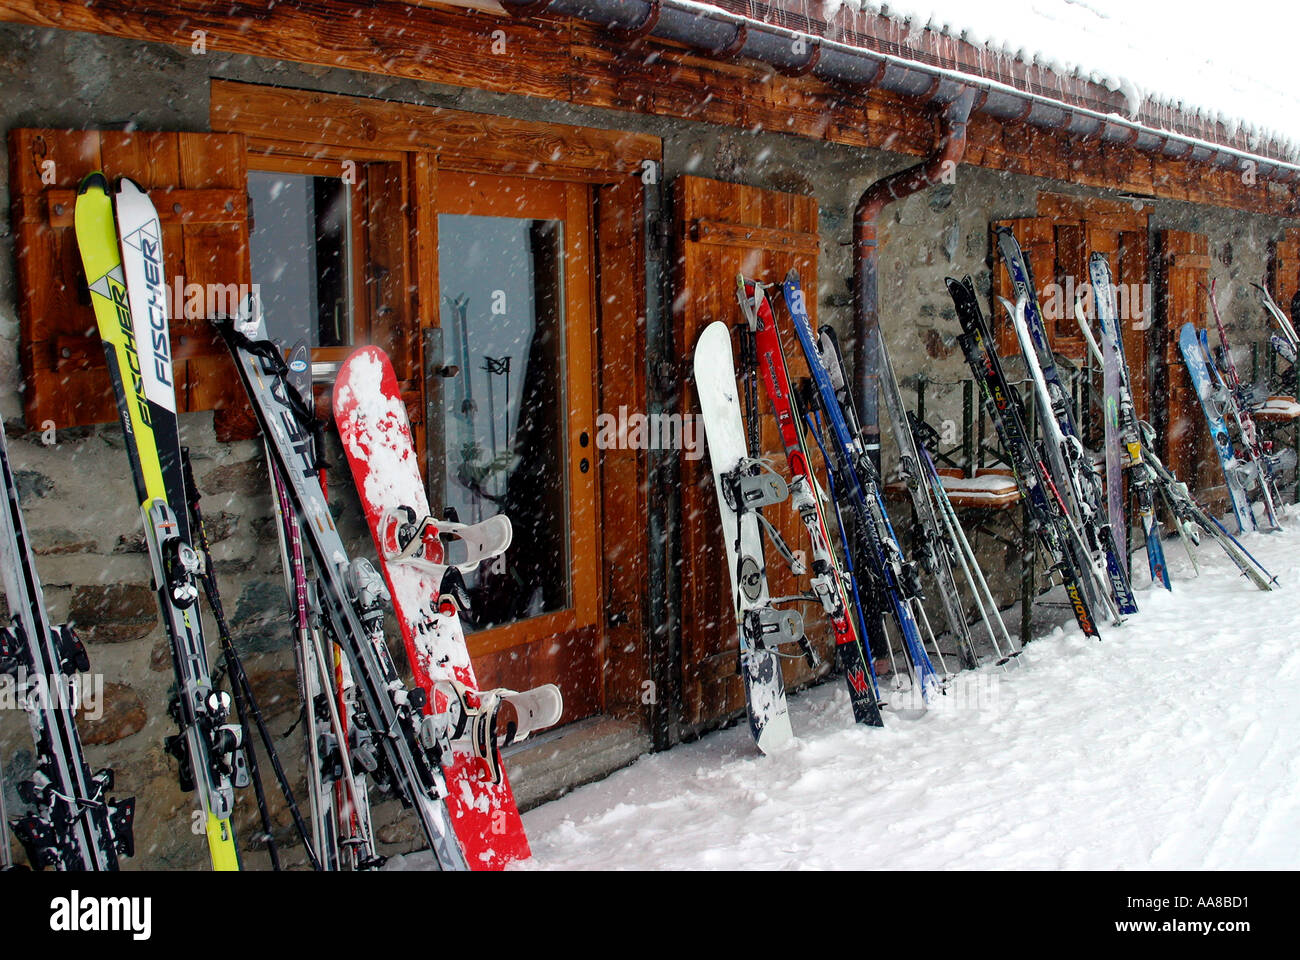 Skis and snowboards stacked outside a mountain restaurant Switzerland Stock Photo